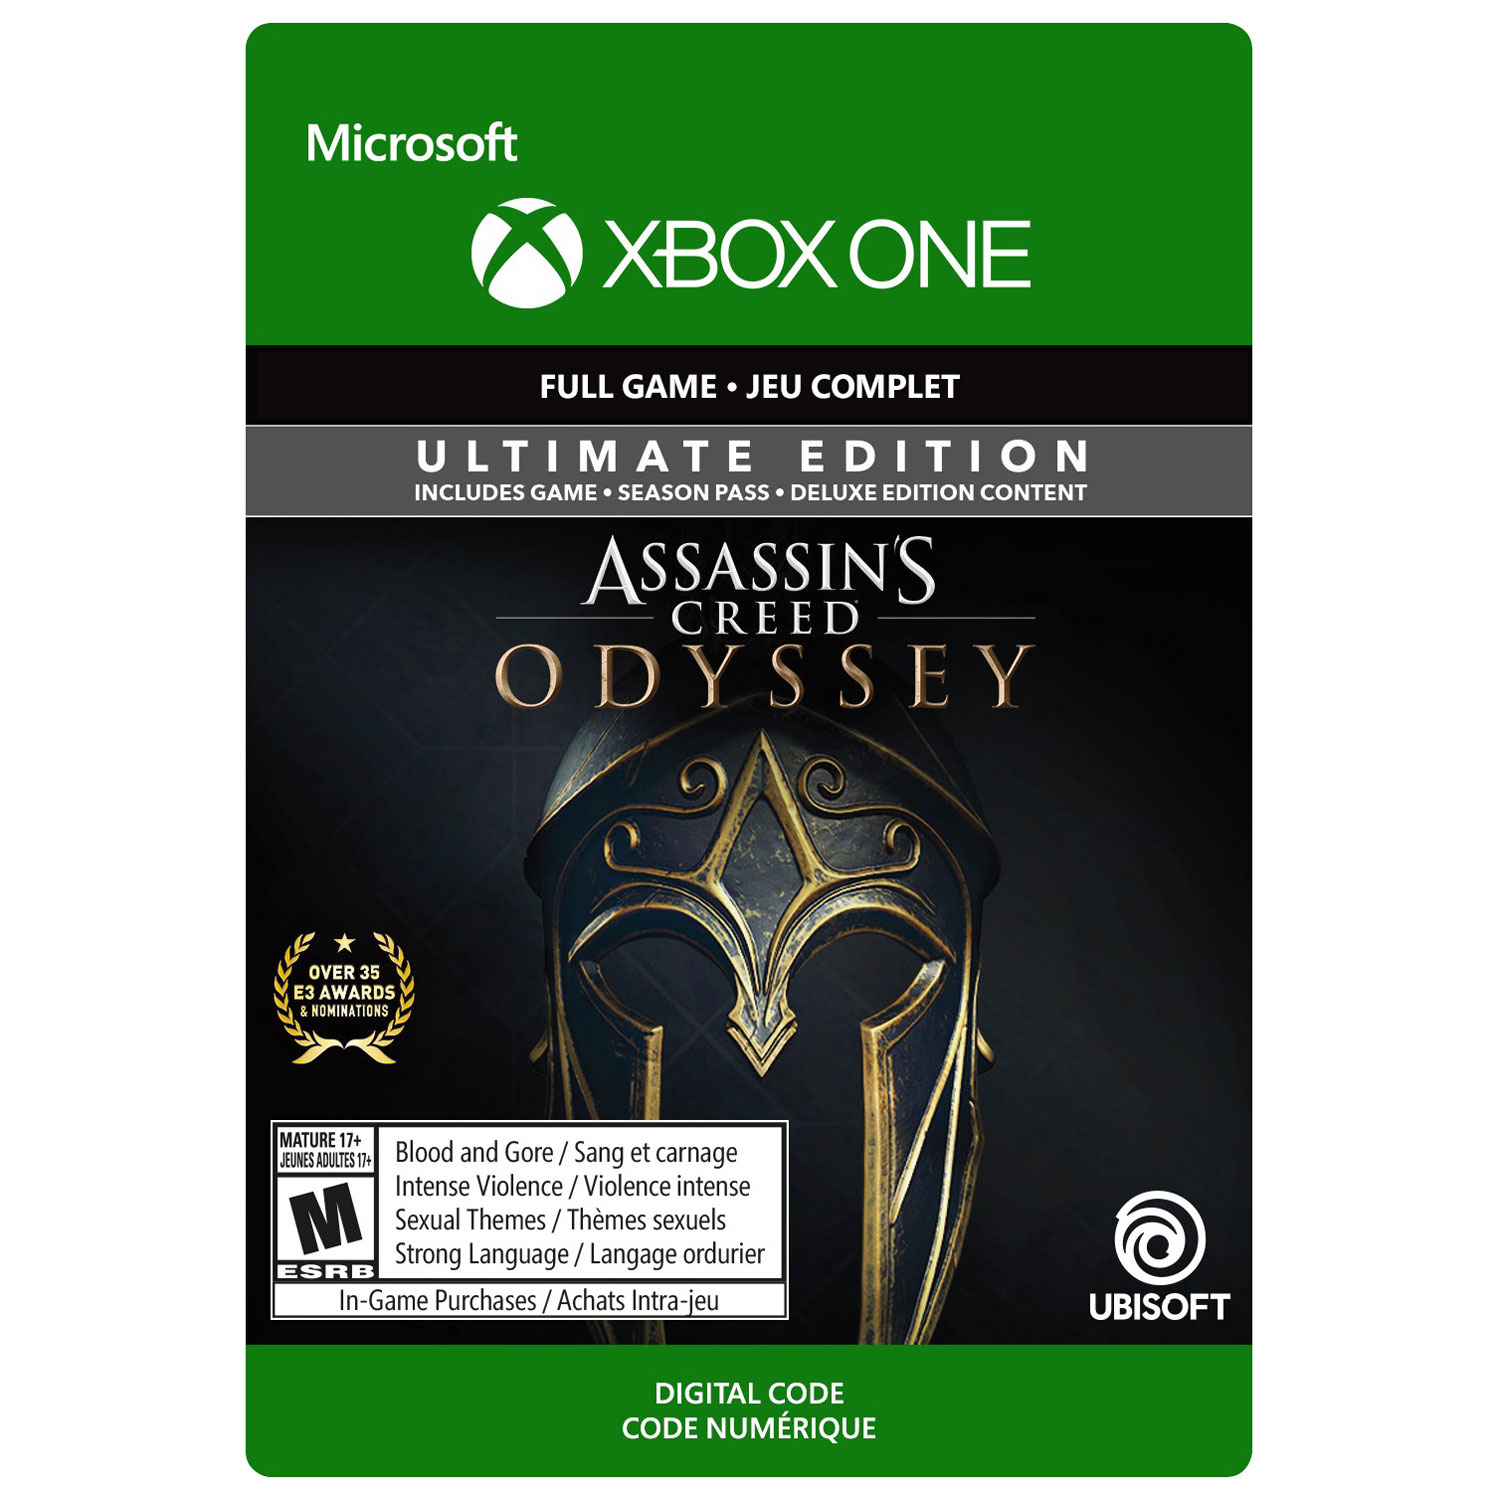 Assassin's Creed Odyssey Ultimate Edition (Xbox One) - Digital Download